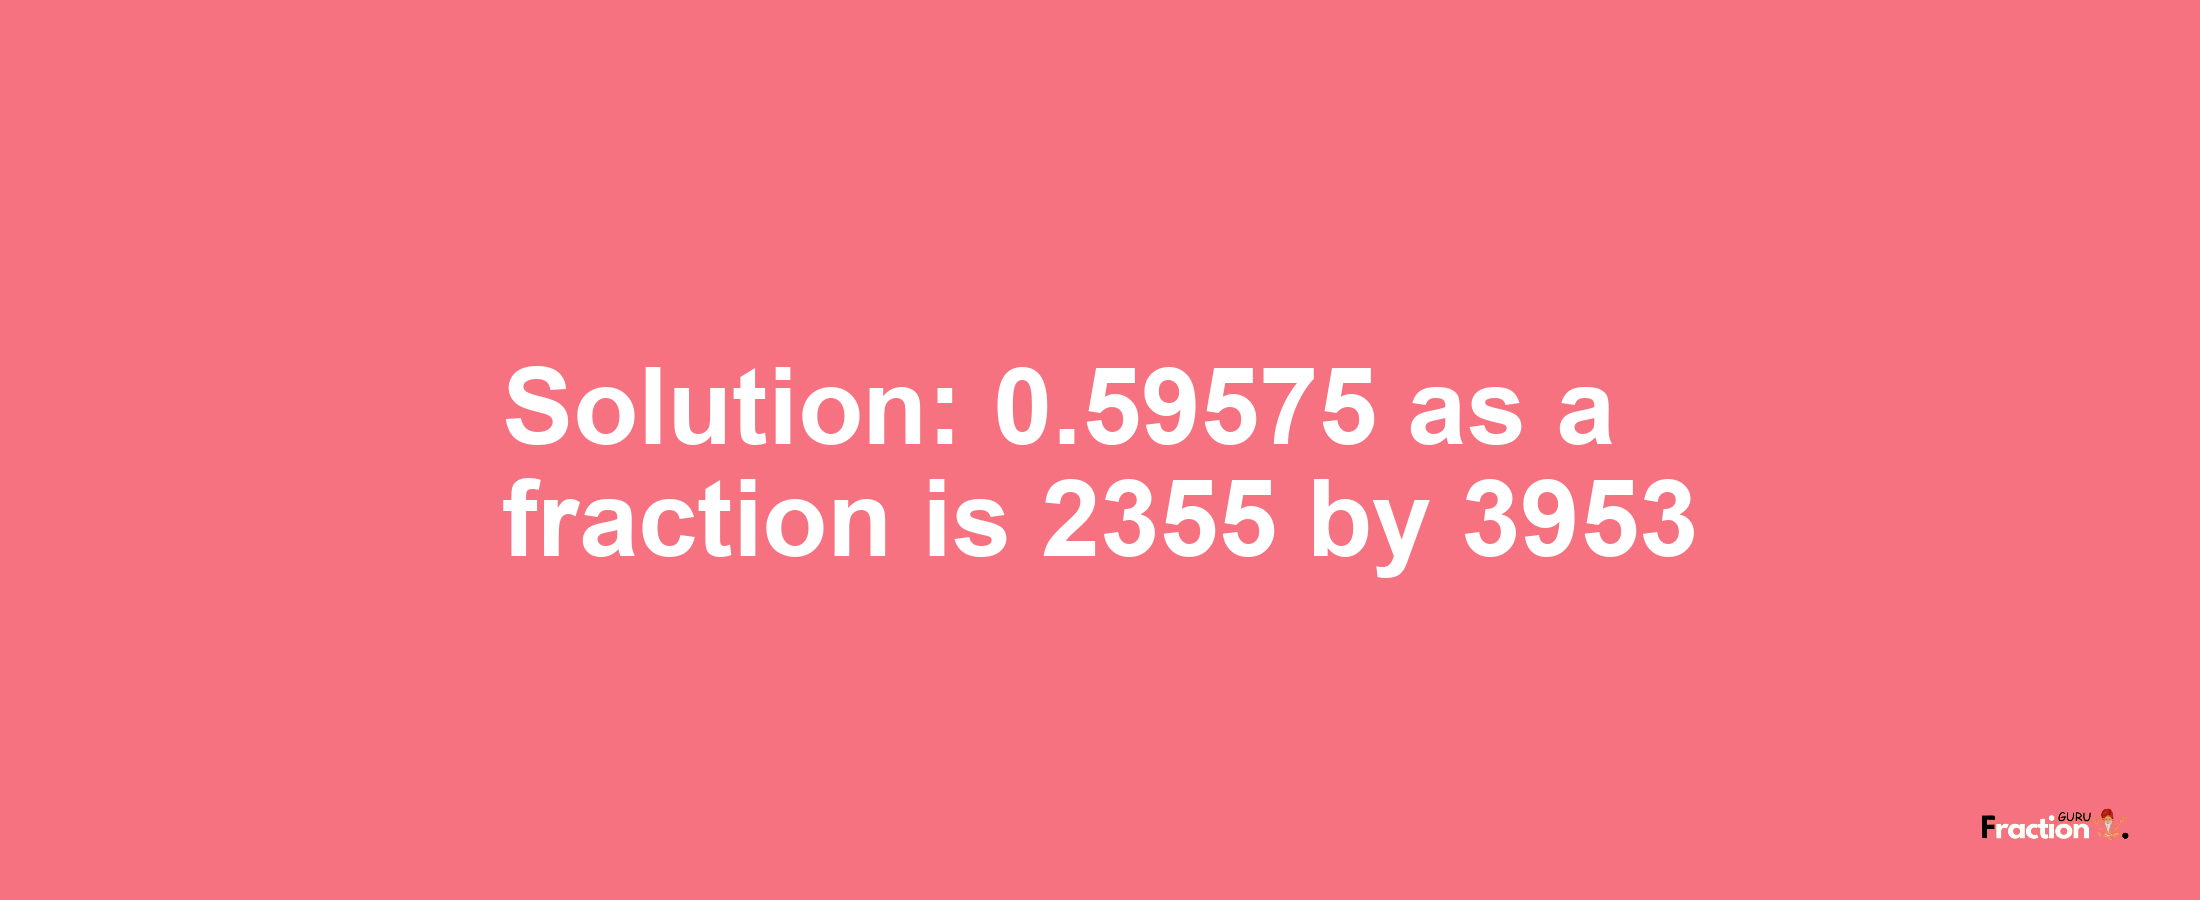 Solution:0.59575 as a fraction is 2355/3953